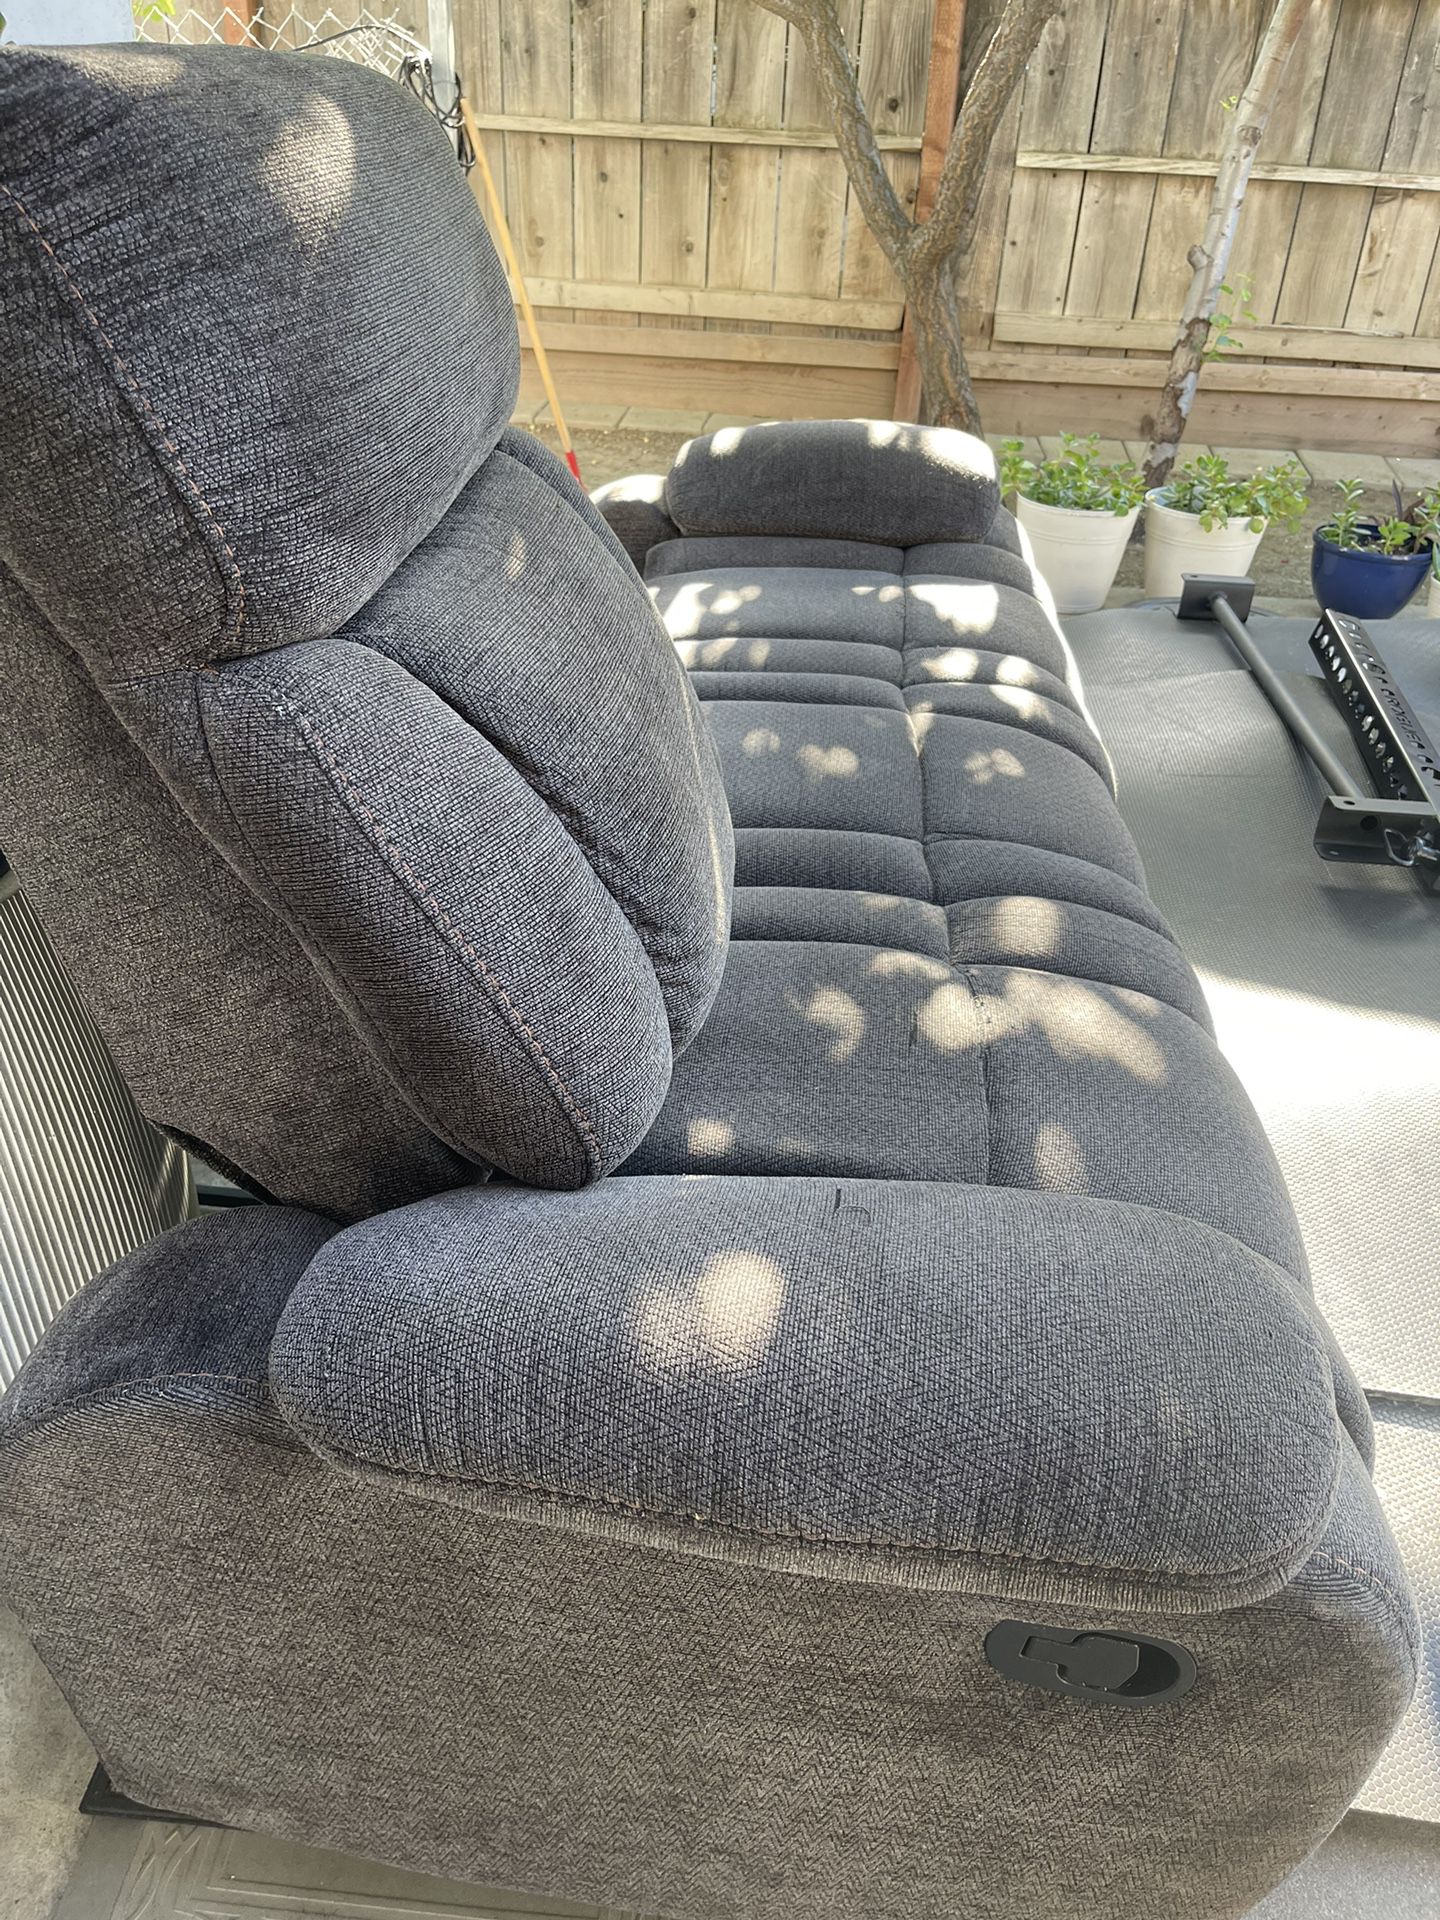 3 Seat Recliner Couch 